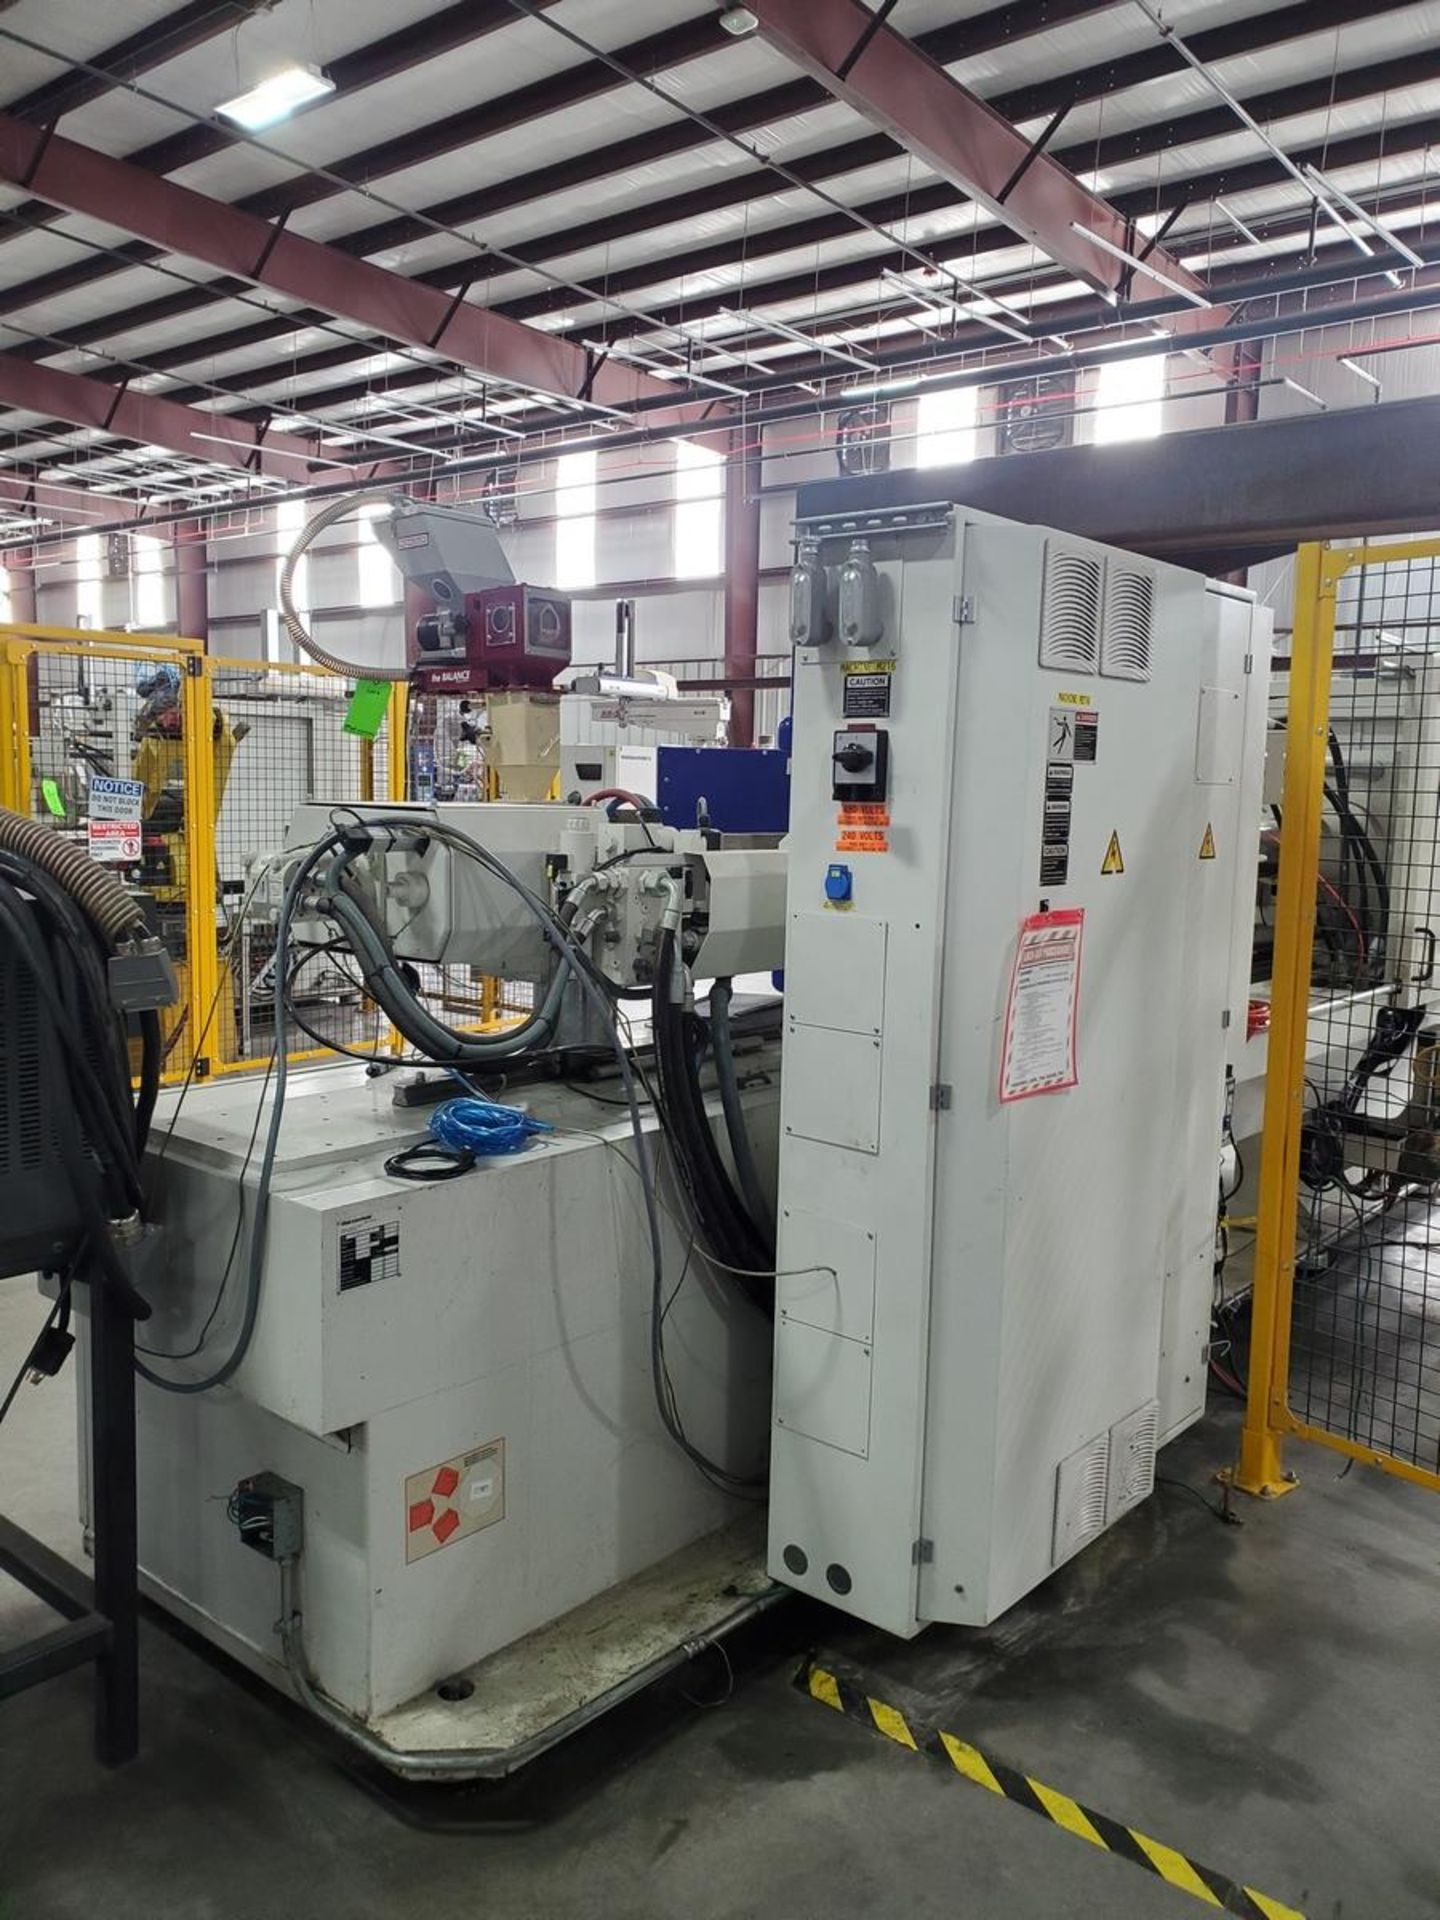 Battenfeld HM 180/750, 180 Ton Injection Molding Machine, New in 2013 - Image 6 of 12